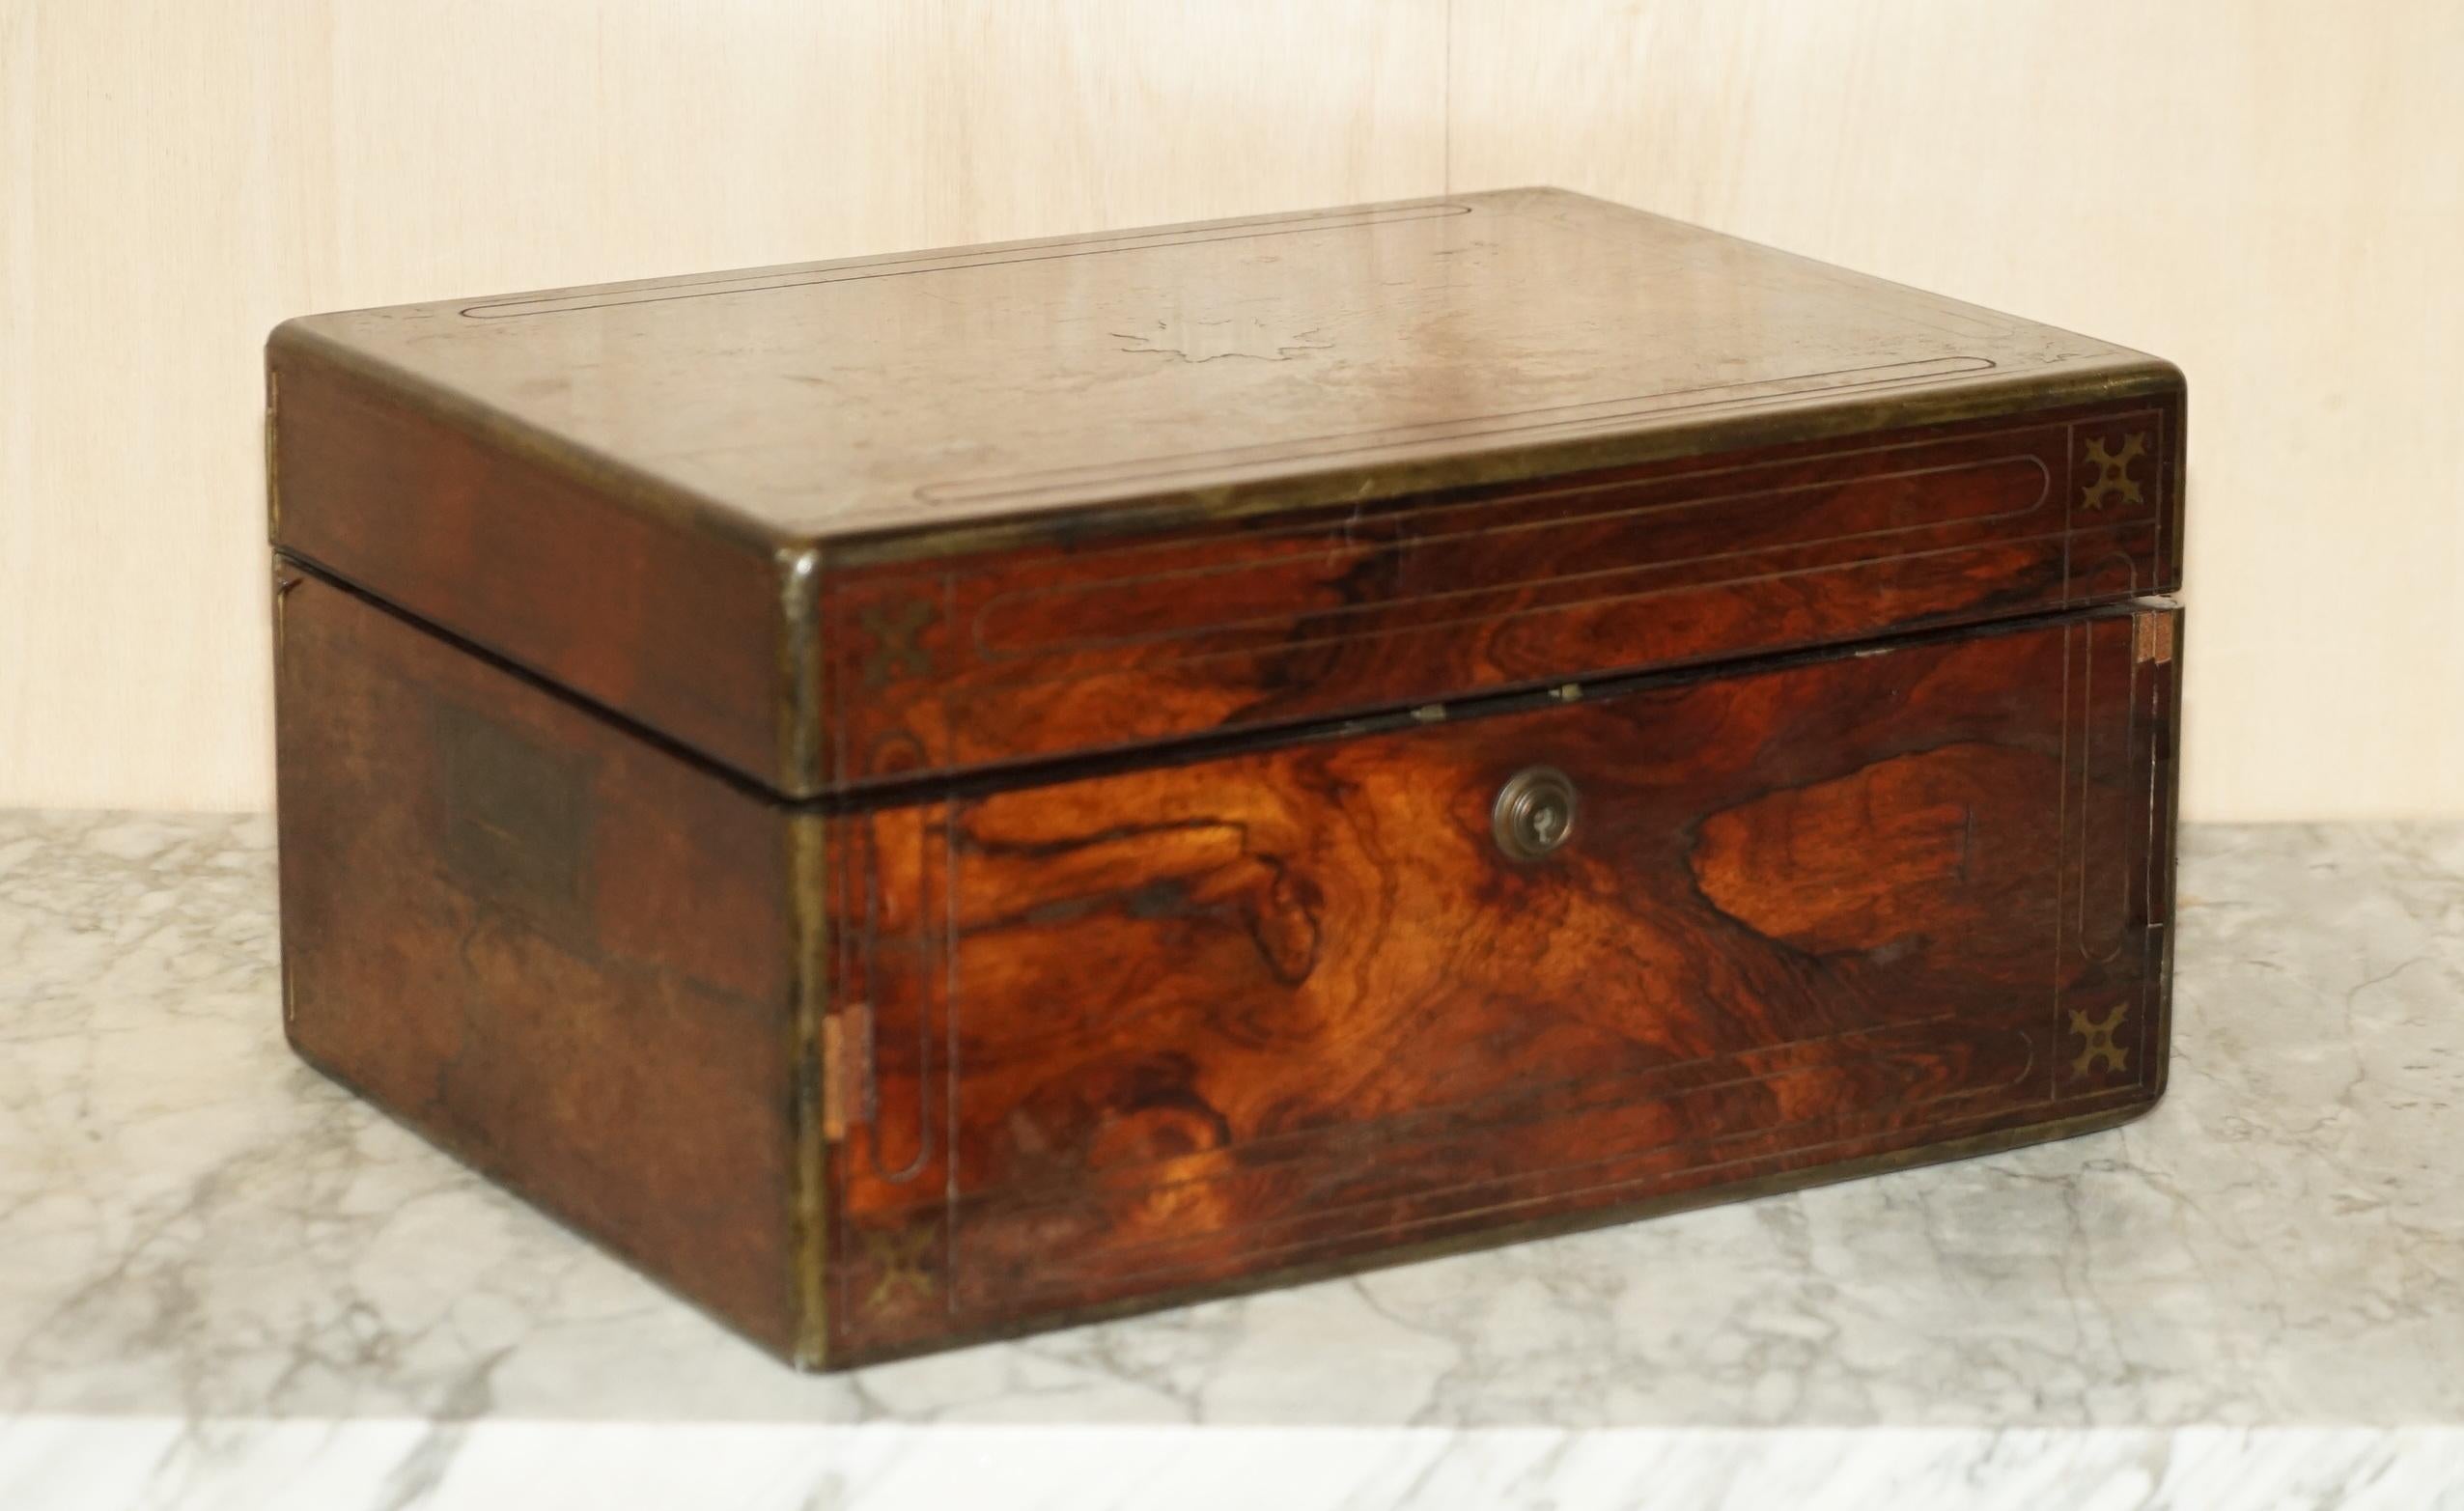 We are delighted to offer for sale this lovely and very rare Regency circa 1810 Rosewood with brass inlay Vanity box with sterling silver jars and contents in need of restoration.

A very collectable and rare piece, the case is in need of